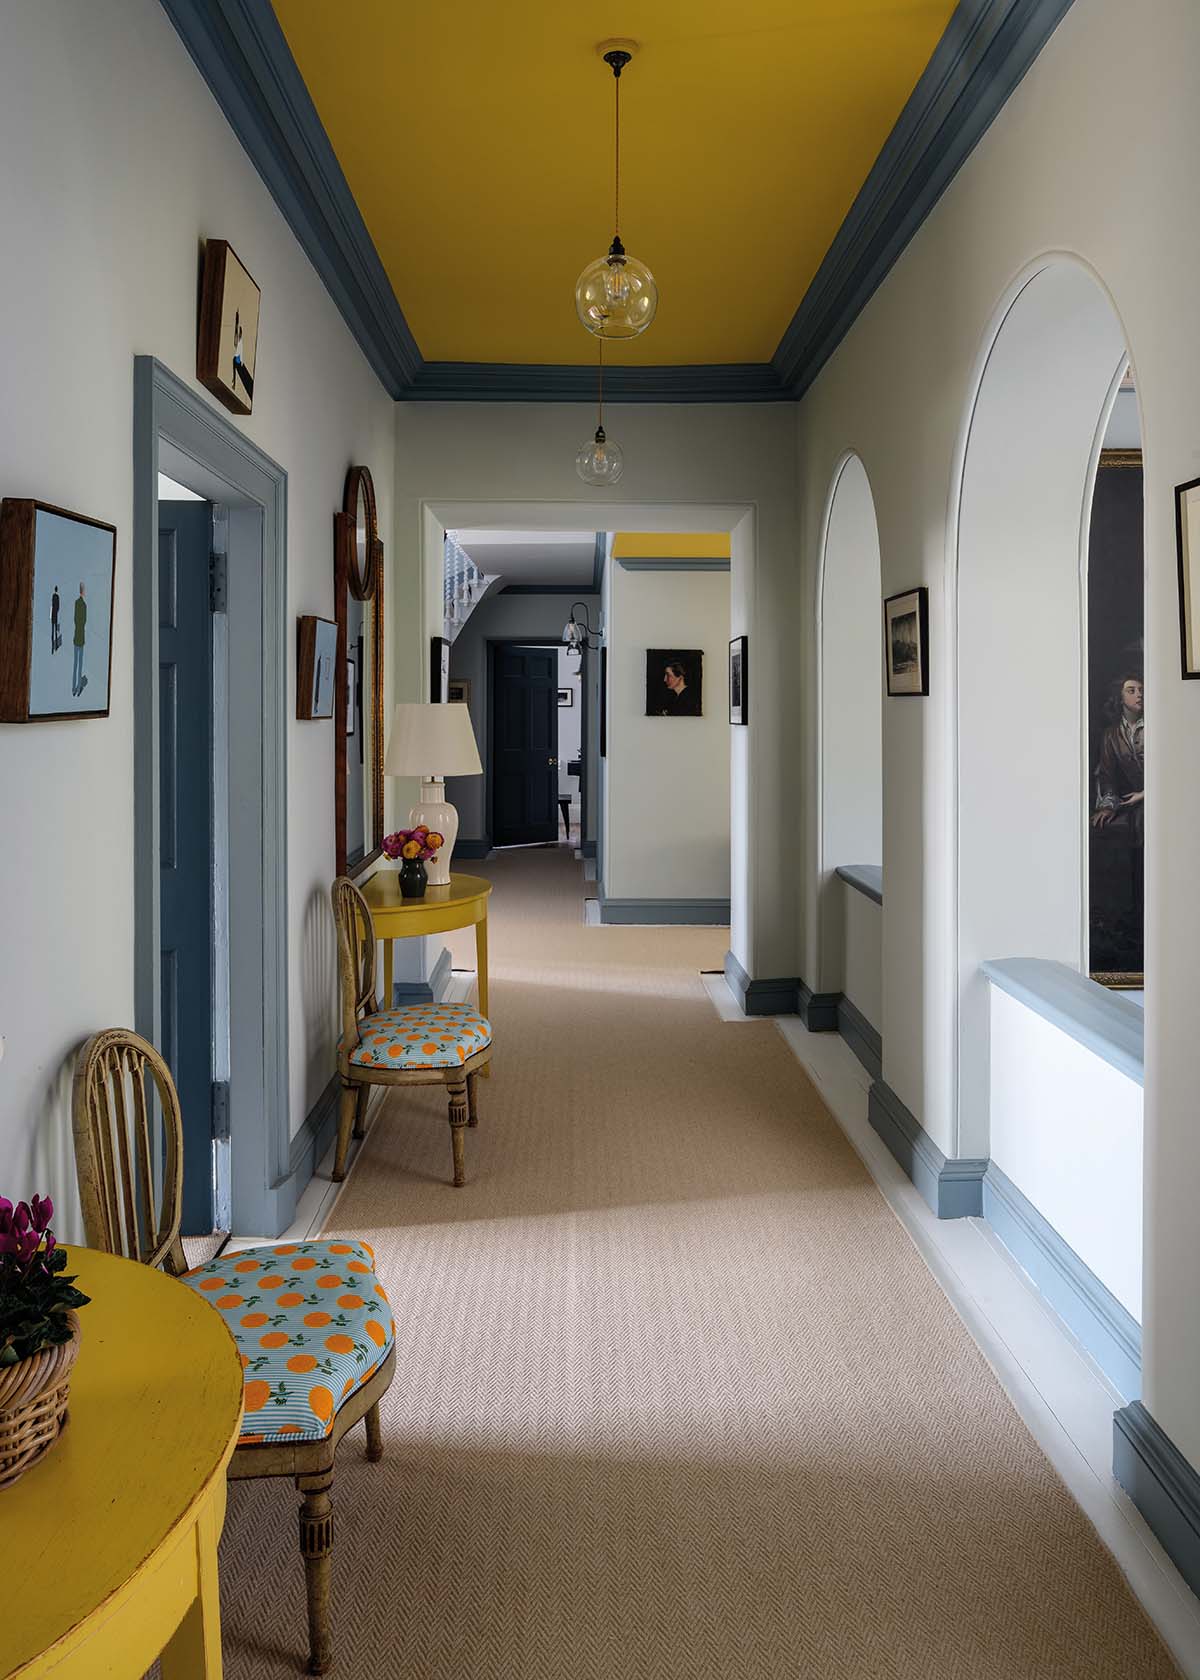 hallway with yellow ceiling and yellow furniture accents